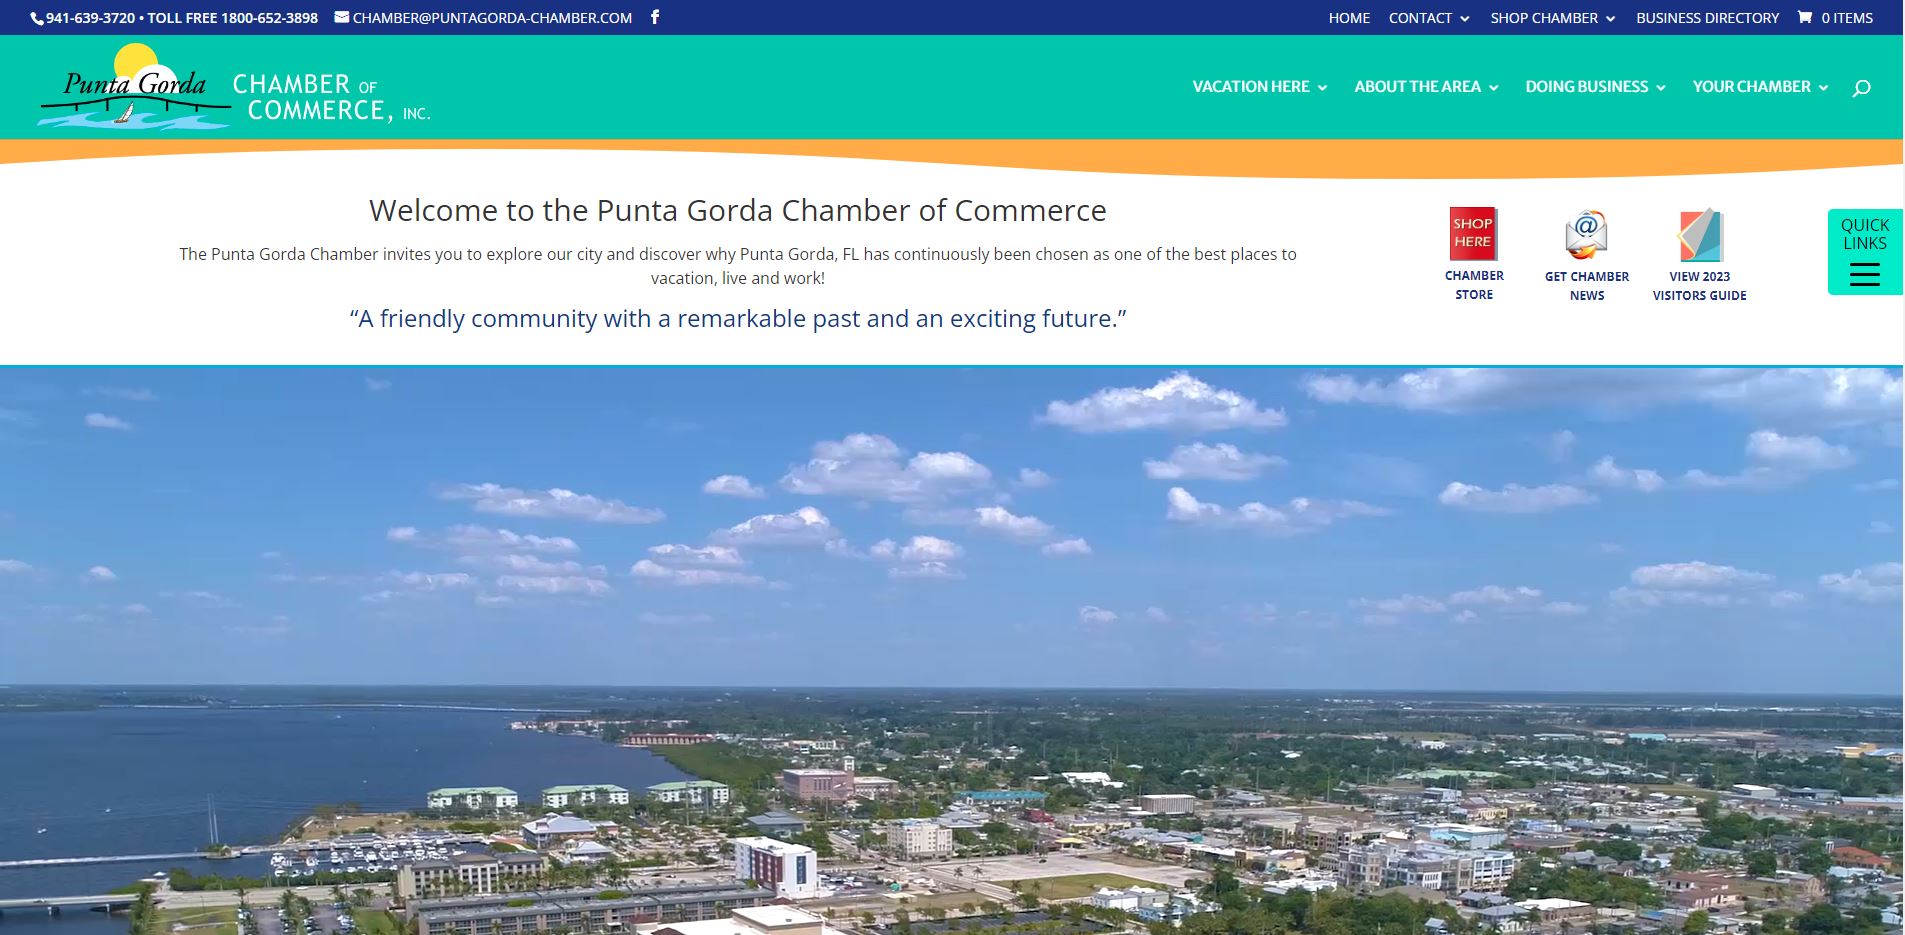 A picture of the Punta Gorda Chamber of Commerce home page